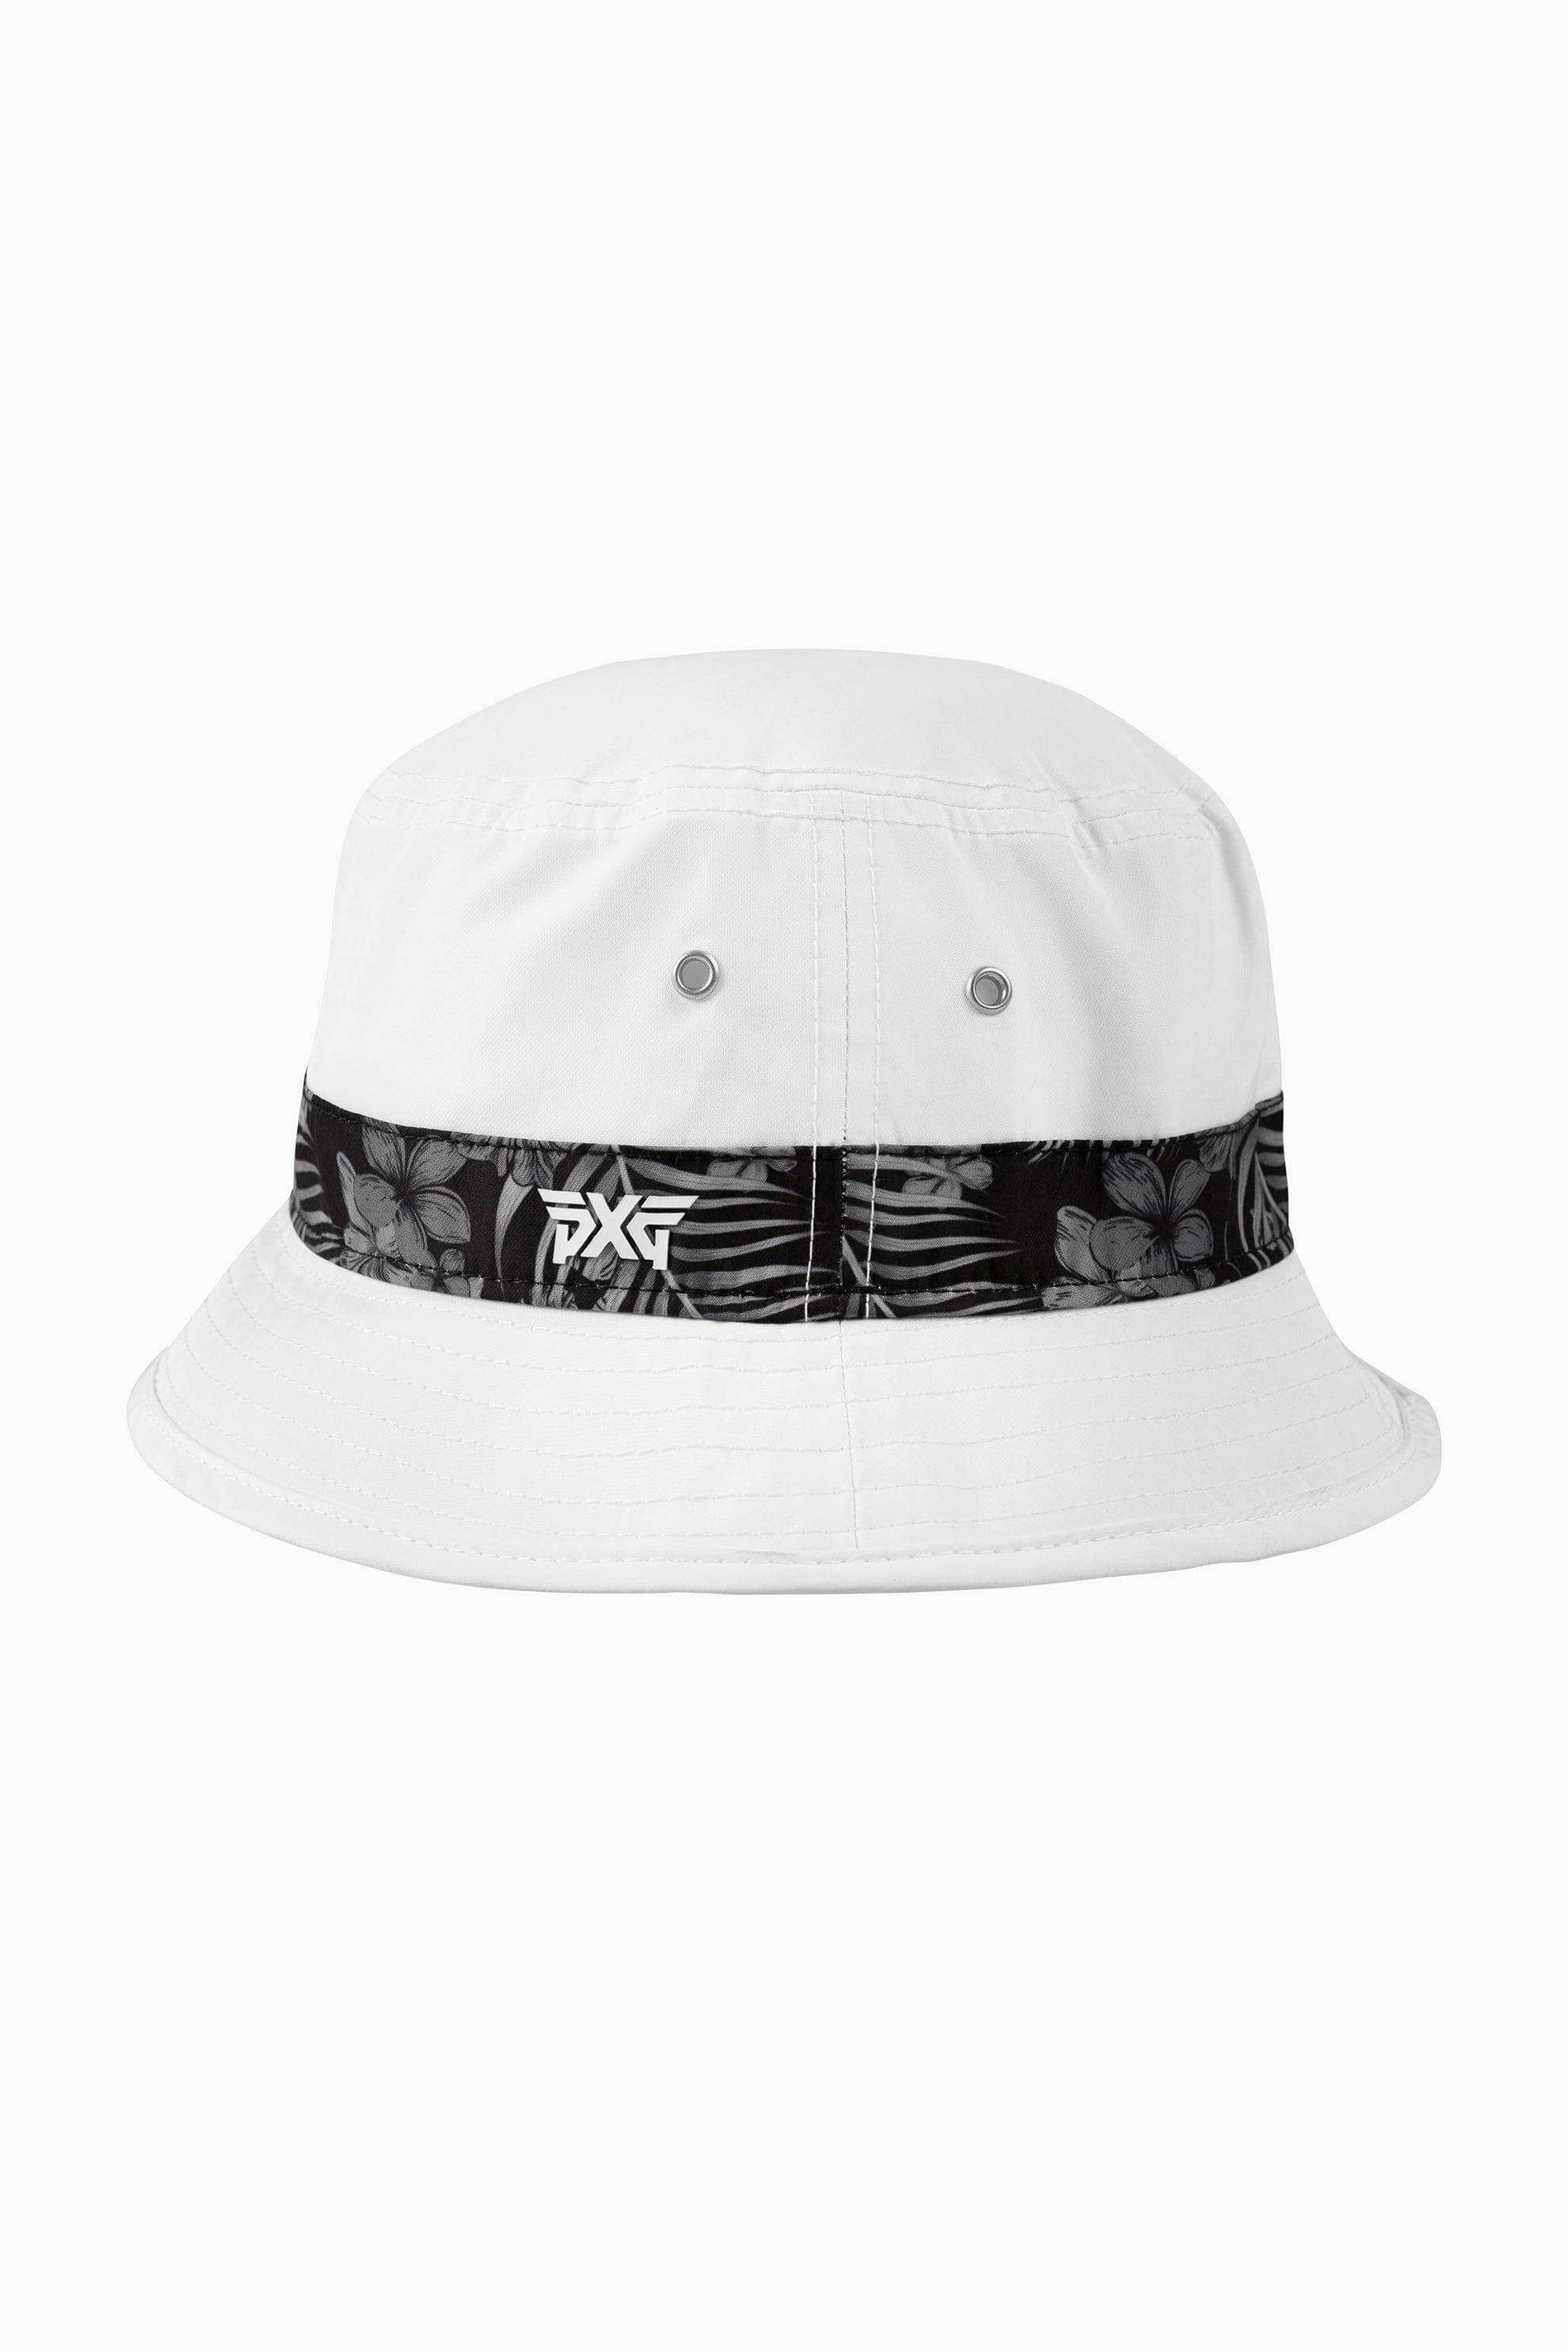 ALOHA 2022 BANDED BUCKET HAT | Shop the Highest Quality Golf Apparel ...